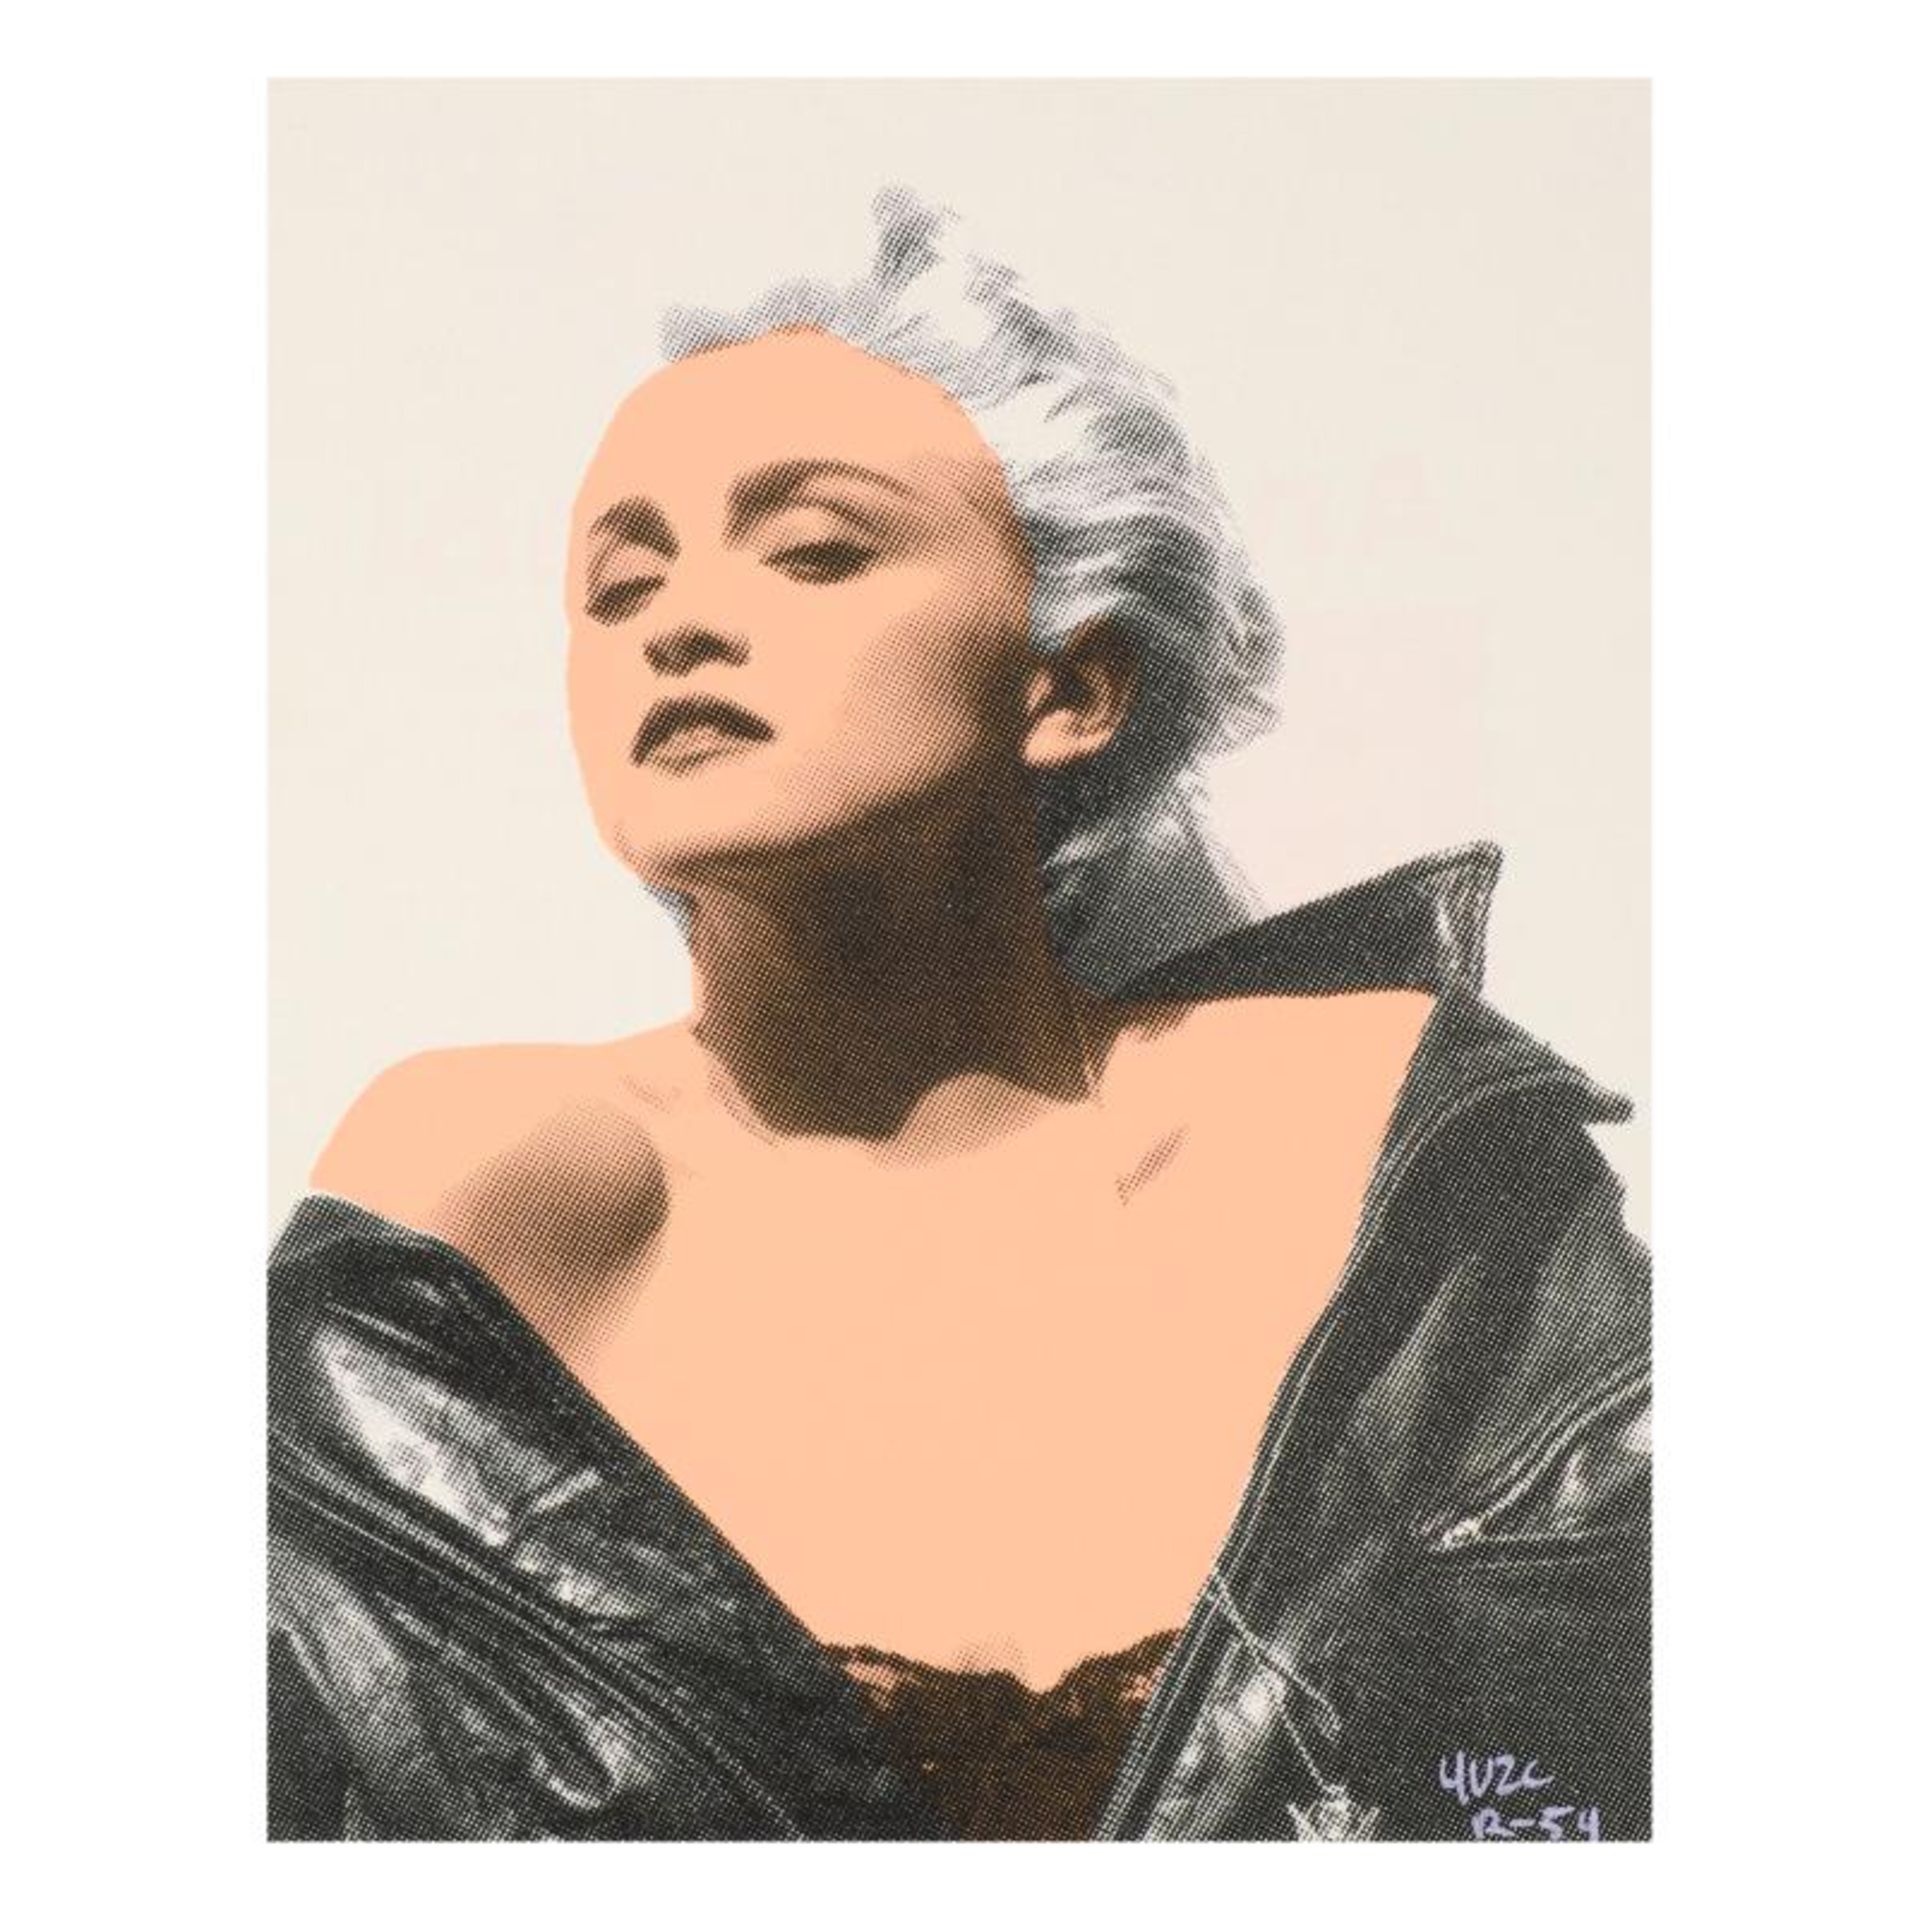 Madonna in Leather by "Ringo" Daniel Funes